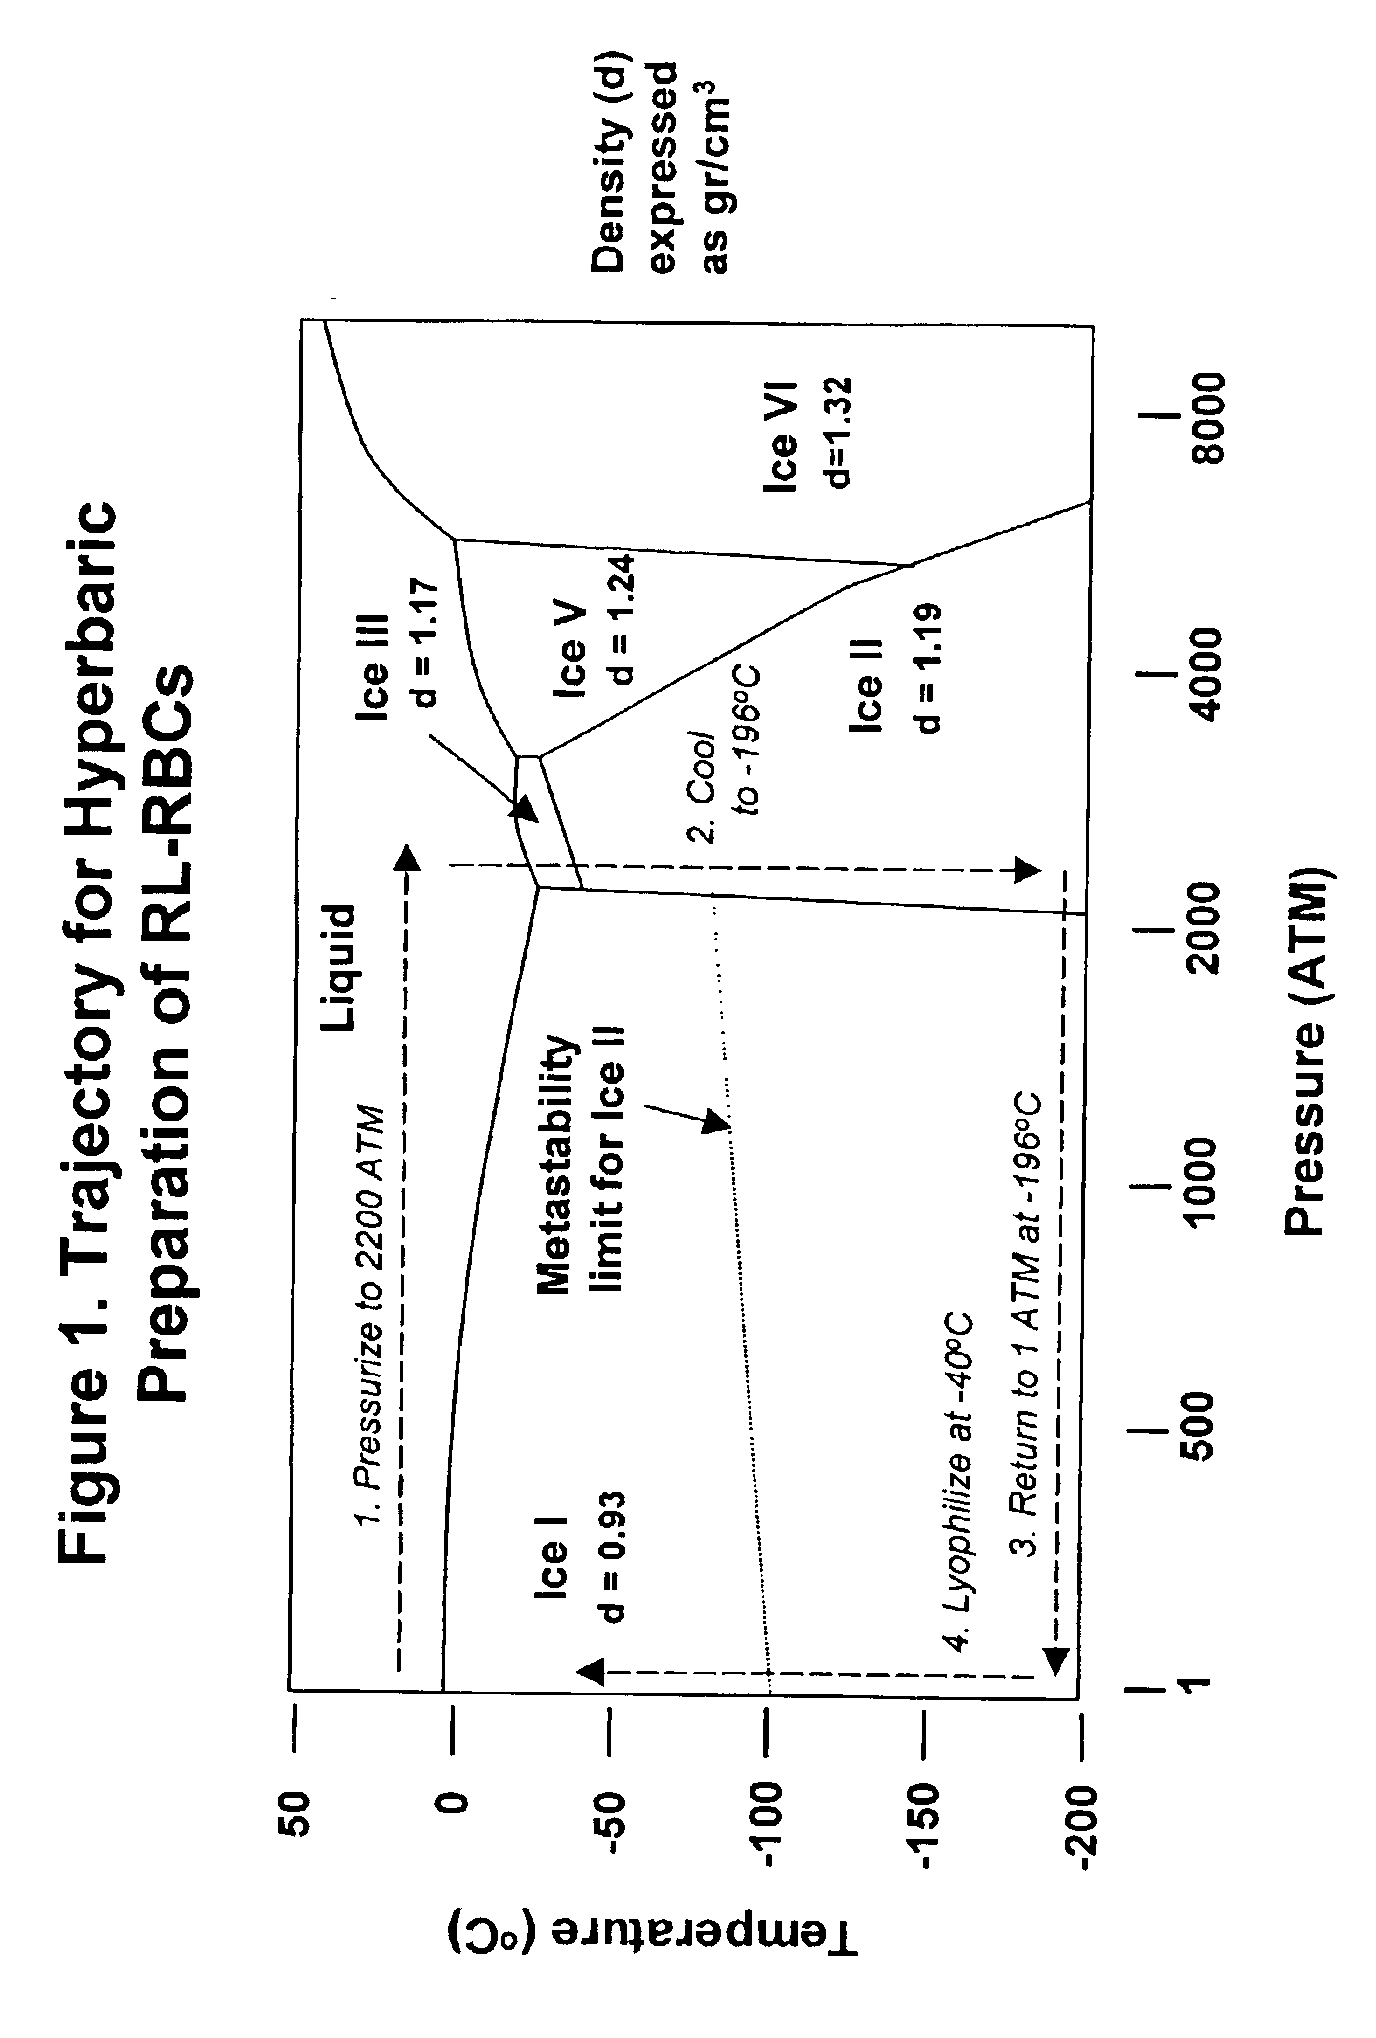 Fixed dried red blood cells and method of use